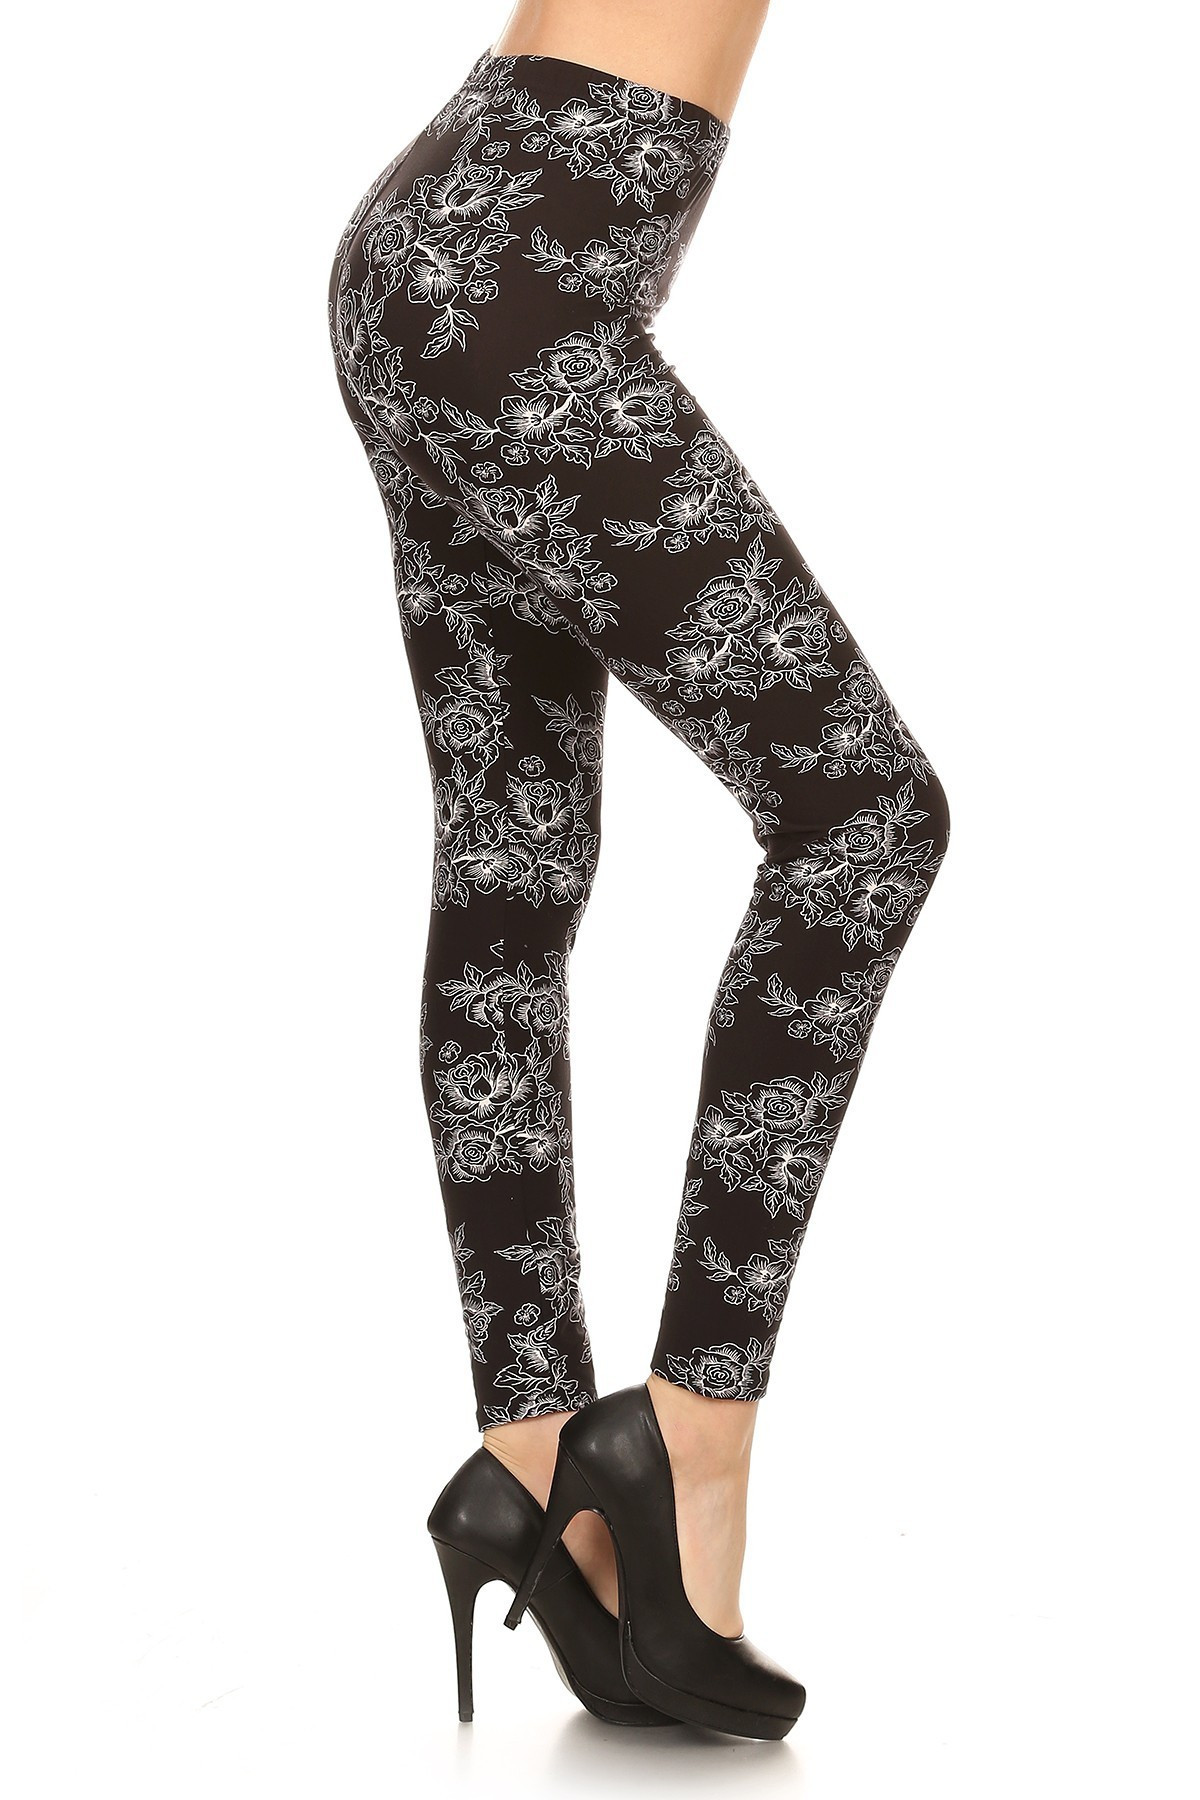 Wholesale Buttery Soft Black and White Floral Outline Leggings ...